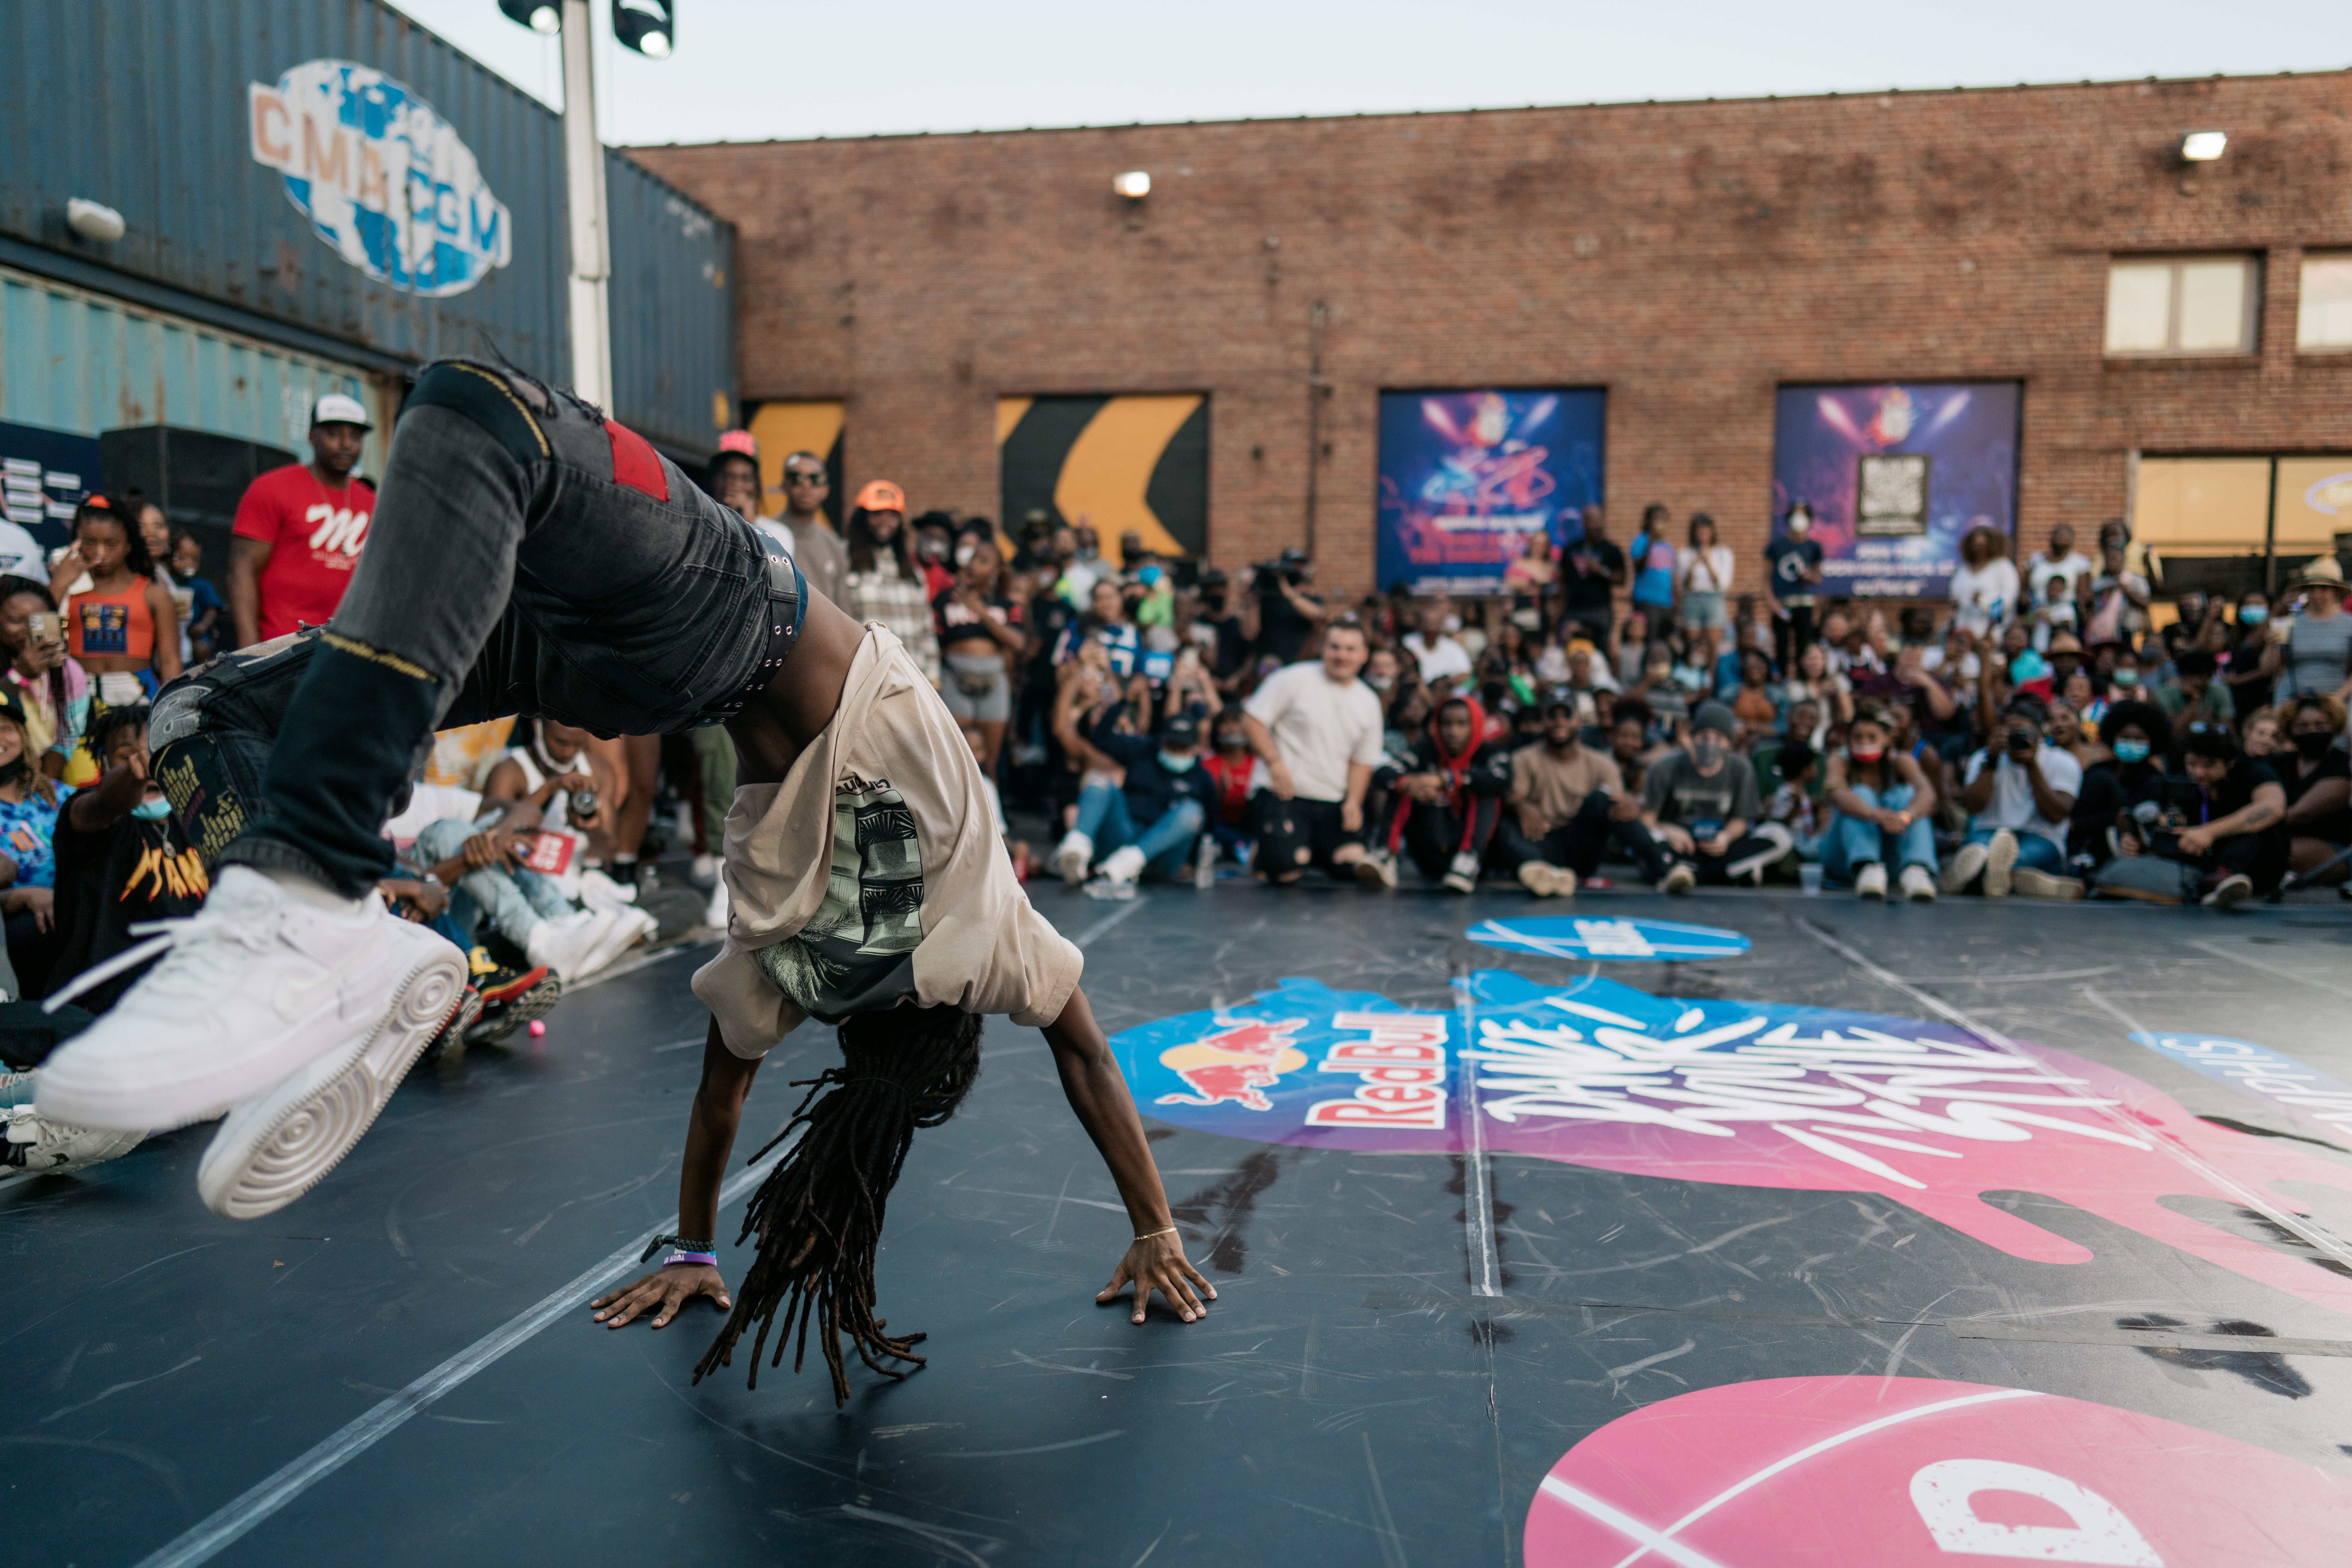 Memphis dancer Jadyn Smooth performs at Redbull Dance your style at Railgarten in Memphis, Tennessee USA on October 10, 2021.